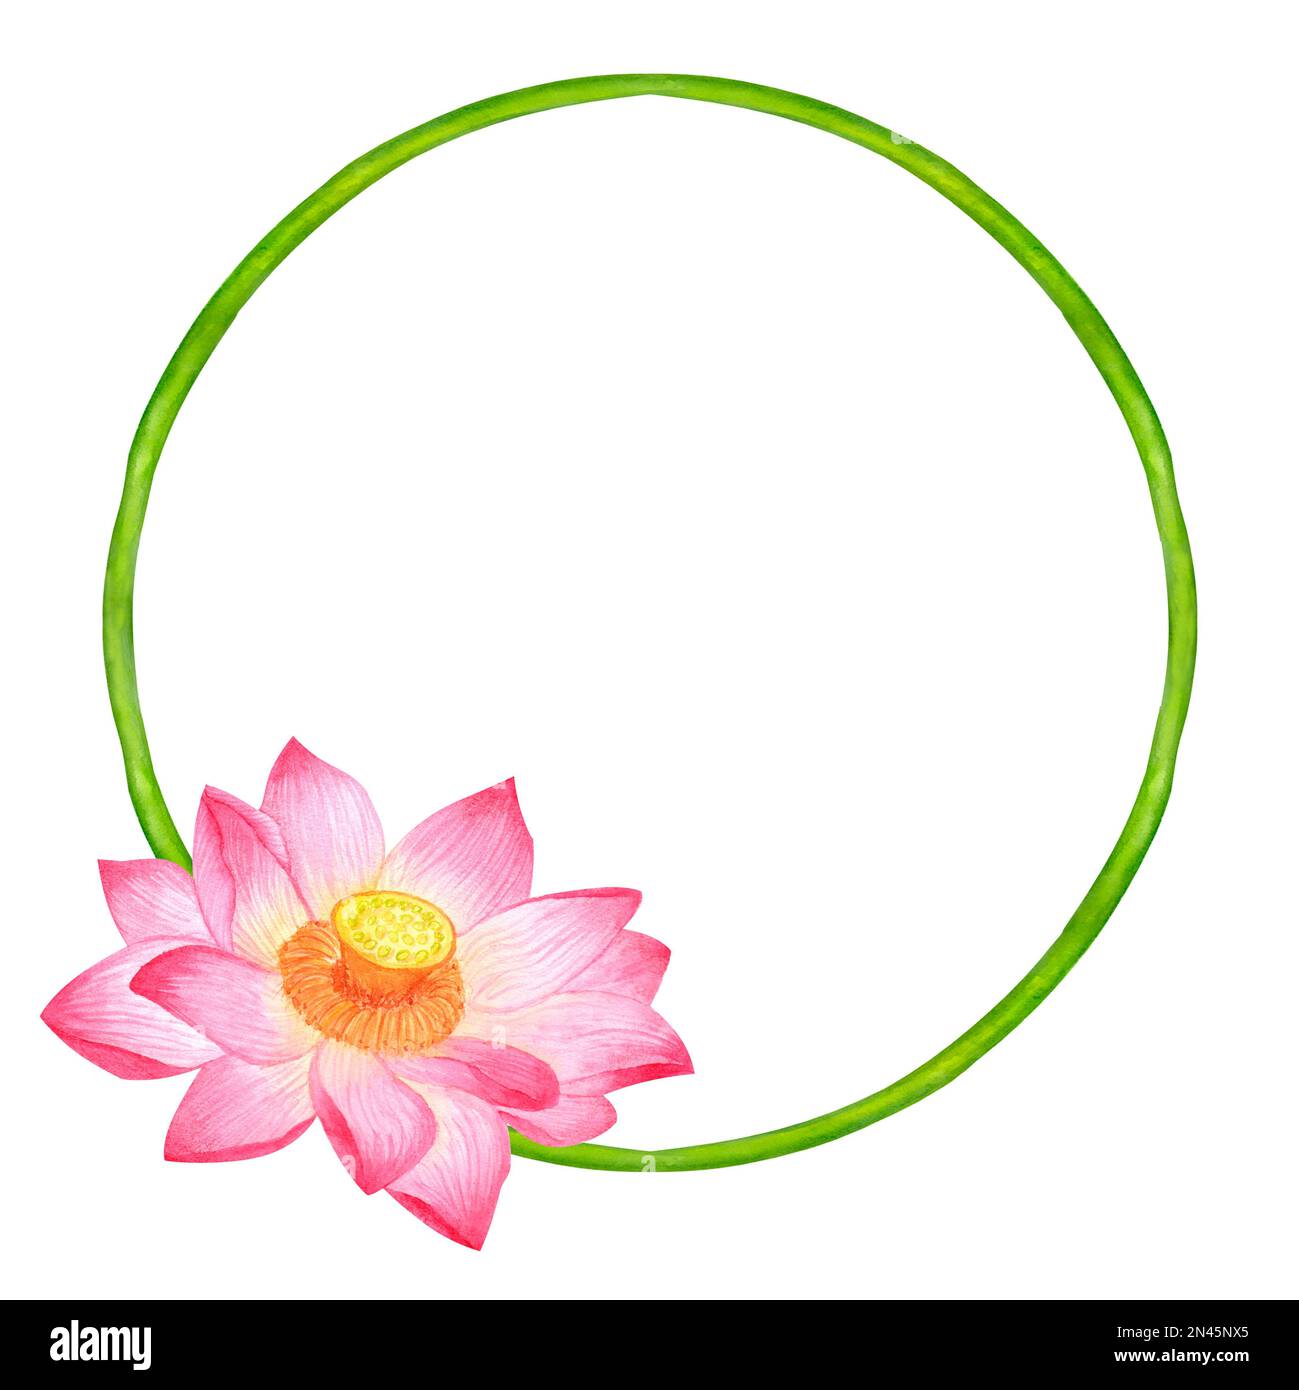 Round frame wreath of rose buds and lotus flower. Tropical plant of Asia. Hand-drawn watercolor illustration isolated on white background. Stock Photo